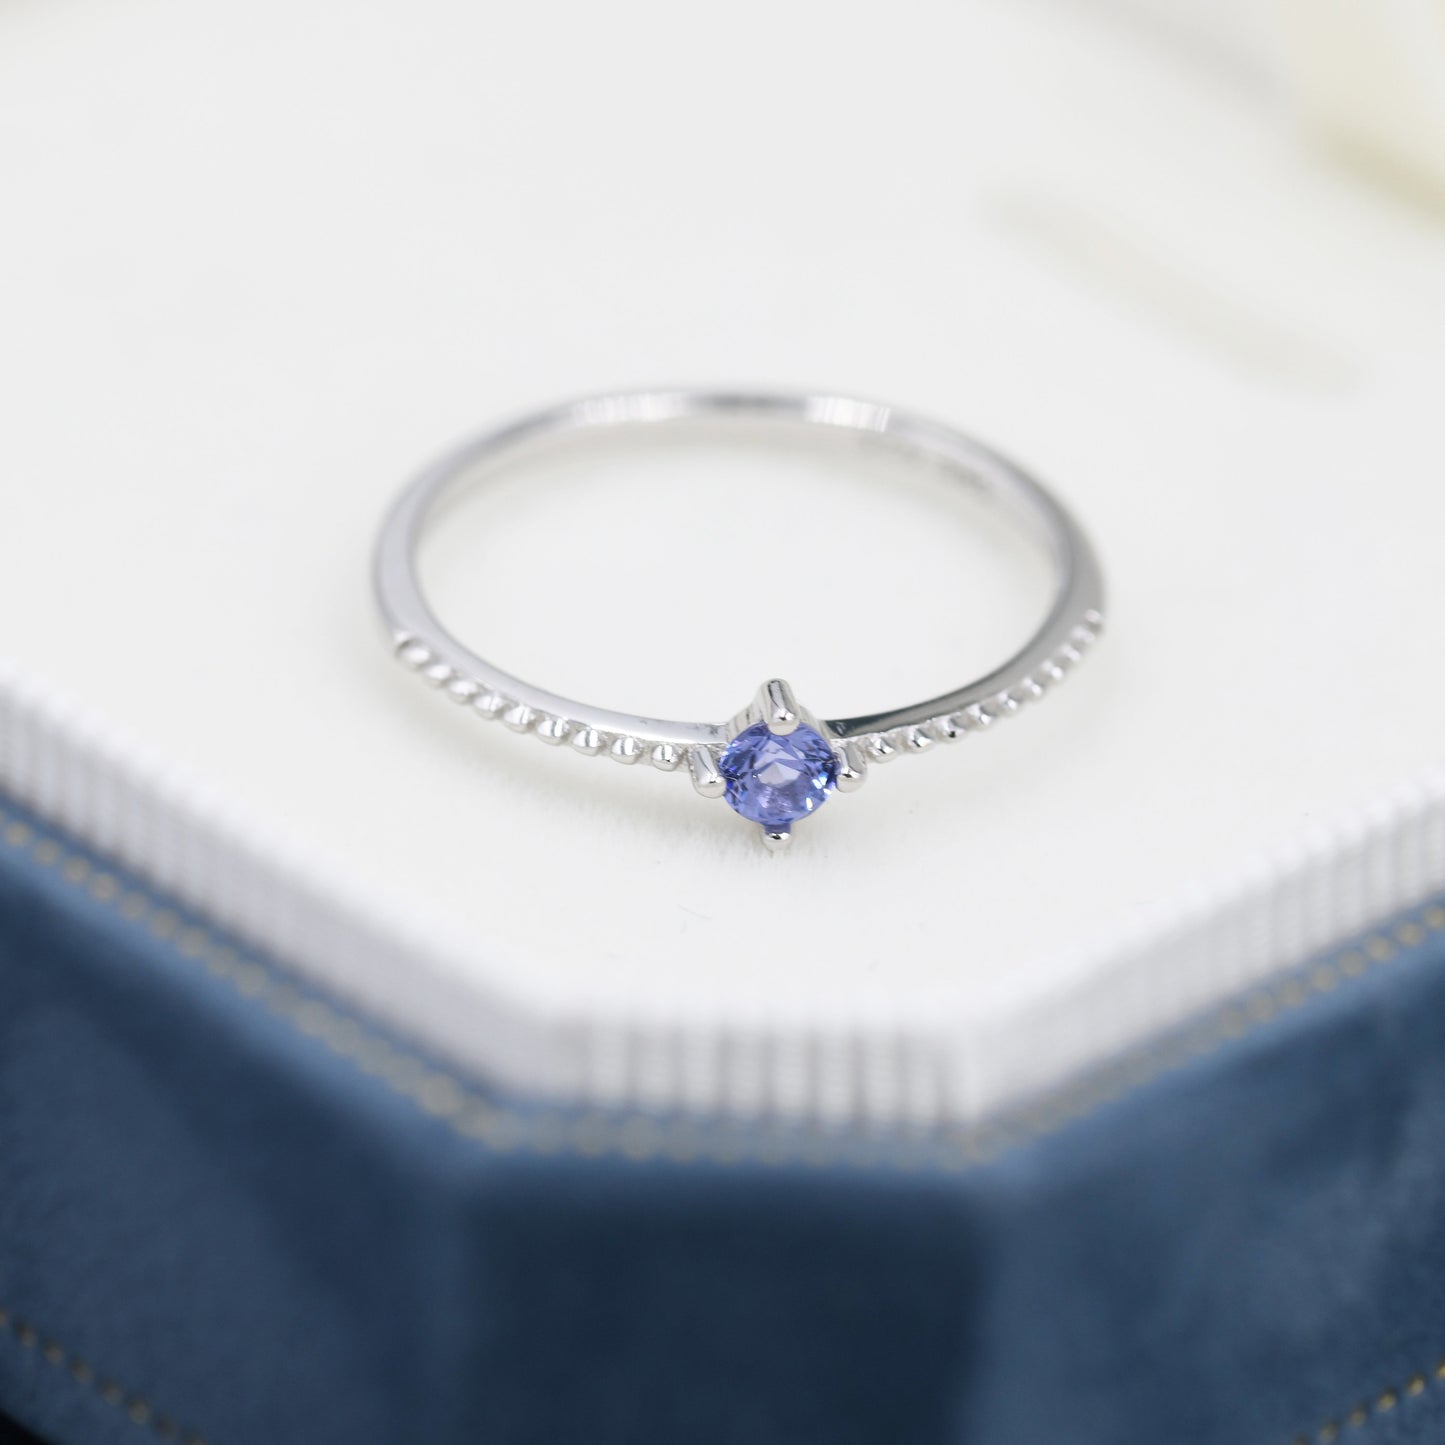 Tanzanite Blue CZ Ring in Sterling Silver, Silver or Gold, Delicate Stacking Ring, Yellow CZ Skinny Band, Size US 6 - 8, December Birthstone